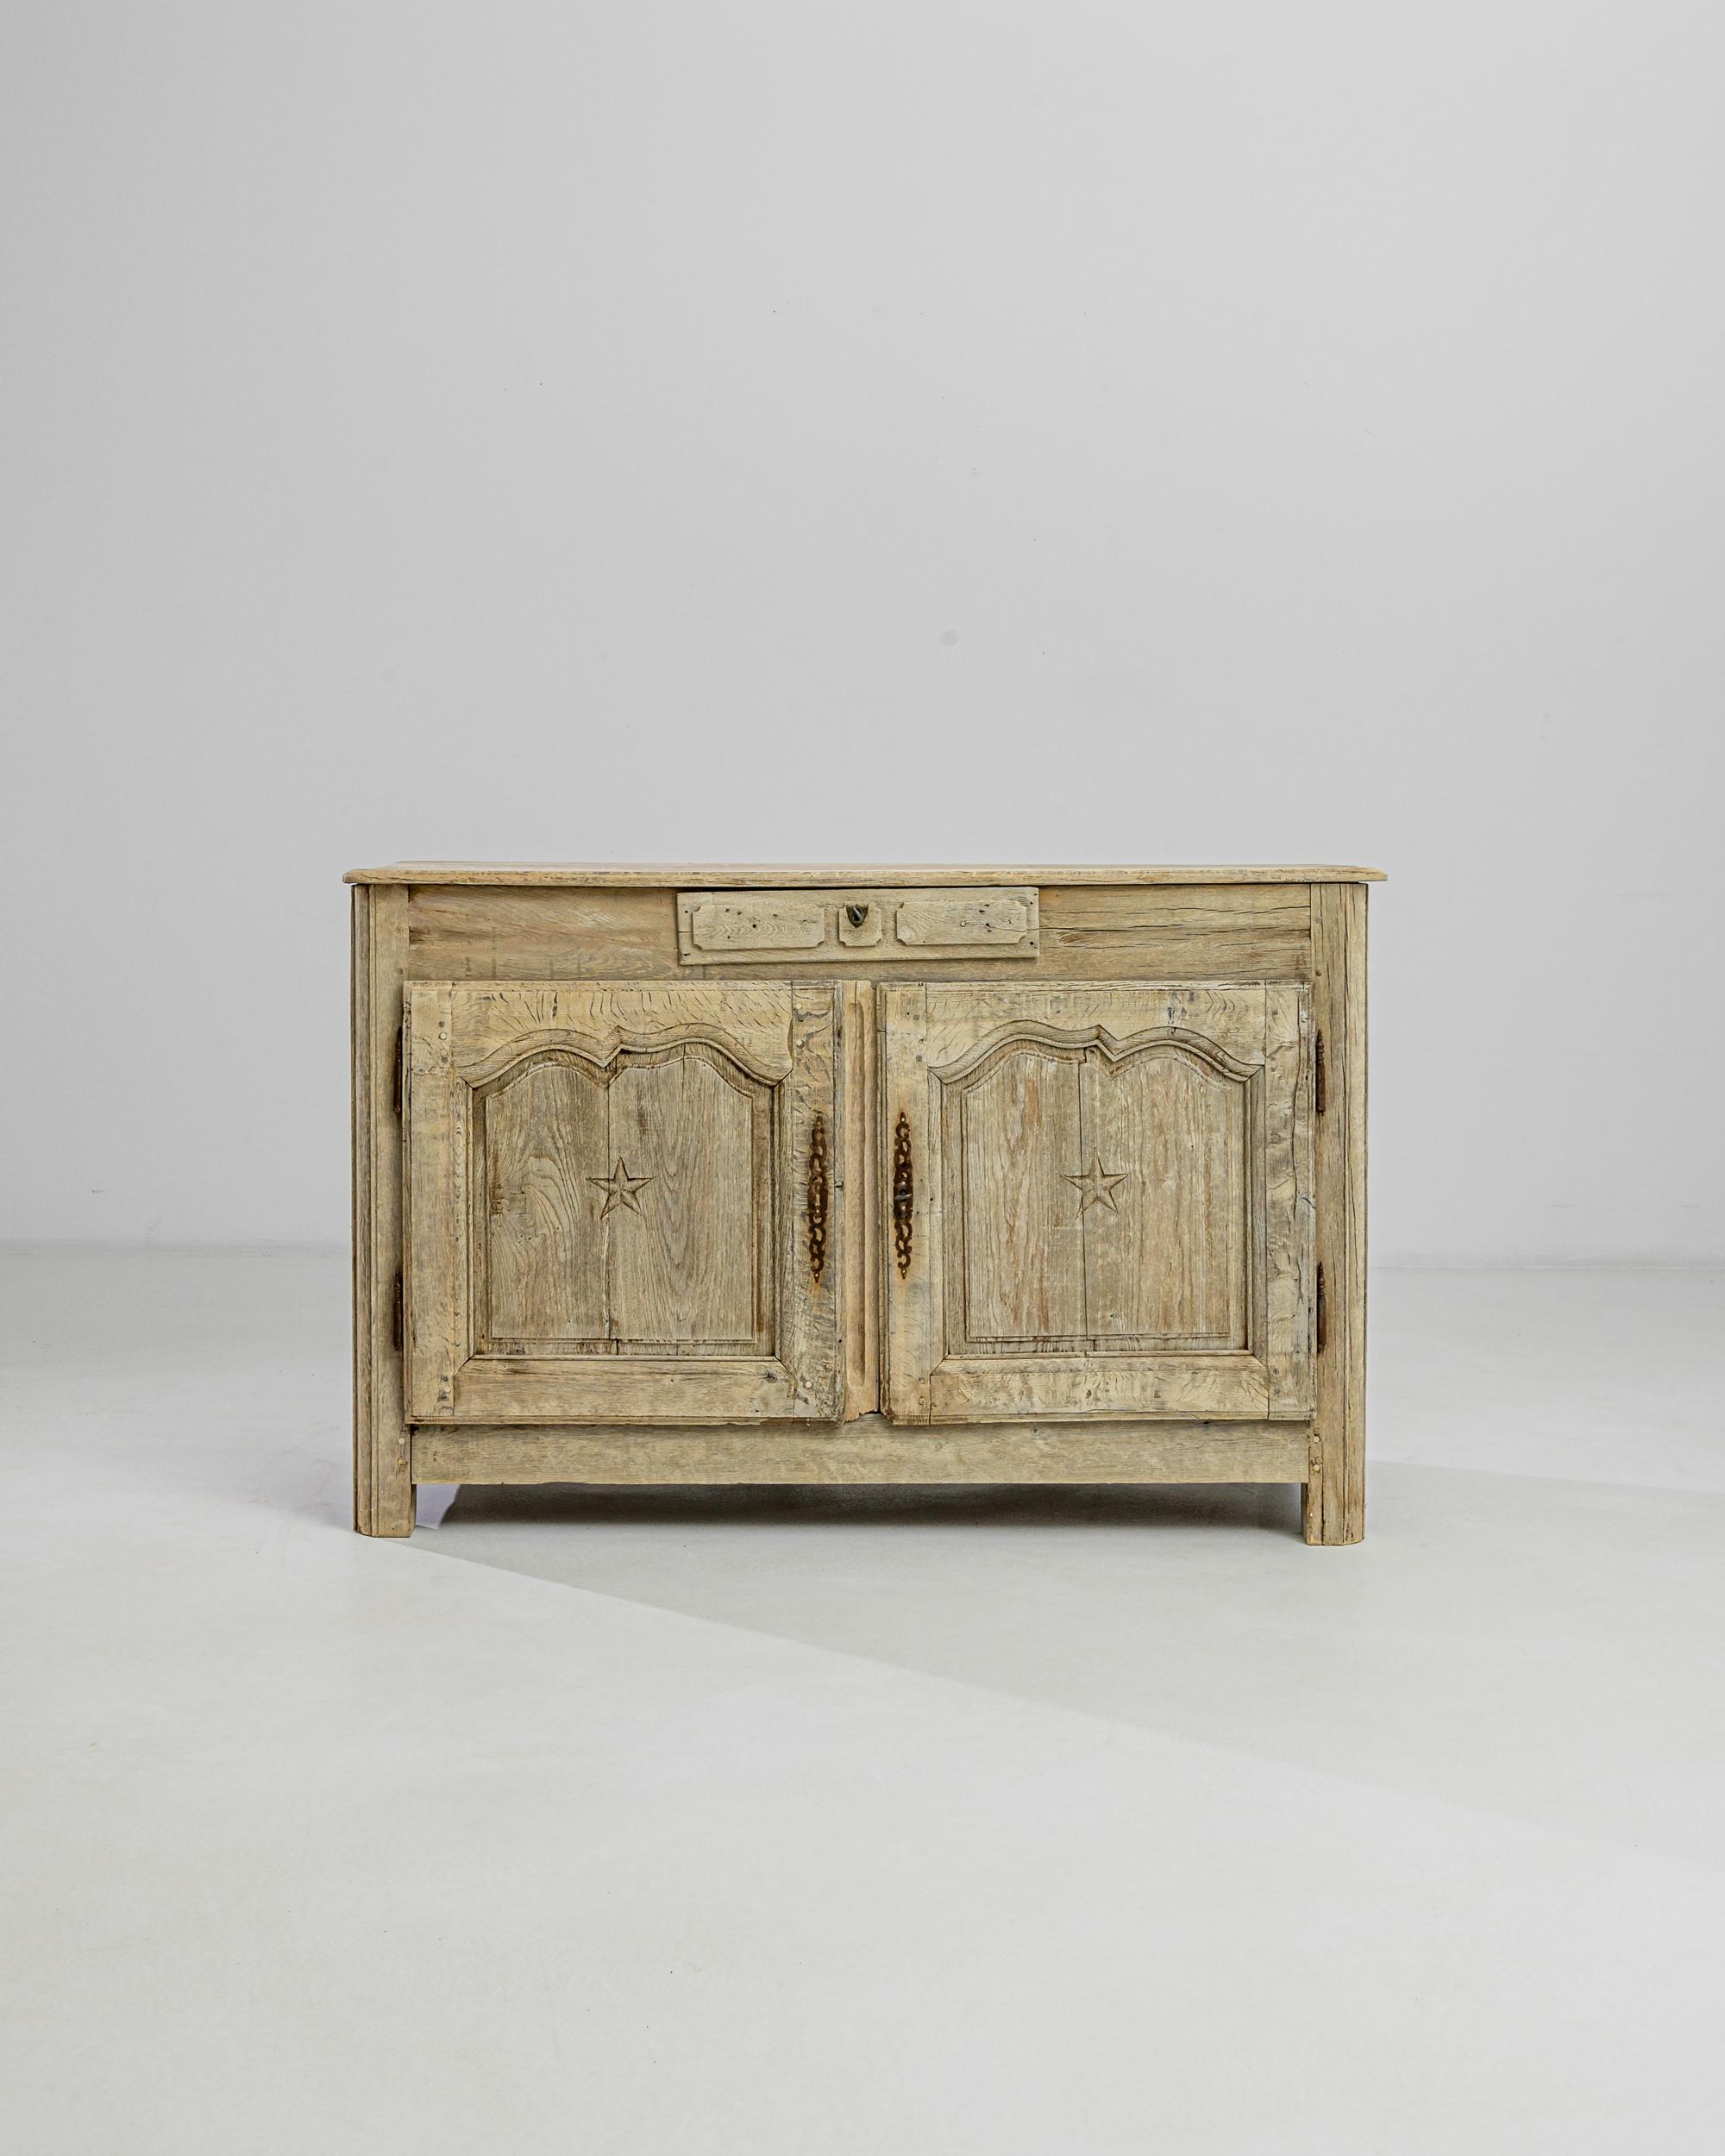 Raised on the sturdy square feet, this 19th century French oak buffet features a single drawer with a crest-shaped lock and two compartments with raised doors adorned with undulating arches and star-carvings. The oxidized patina of the original